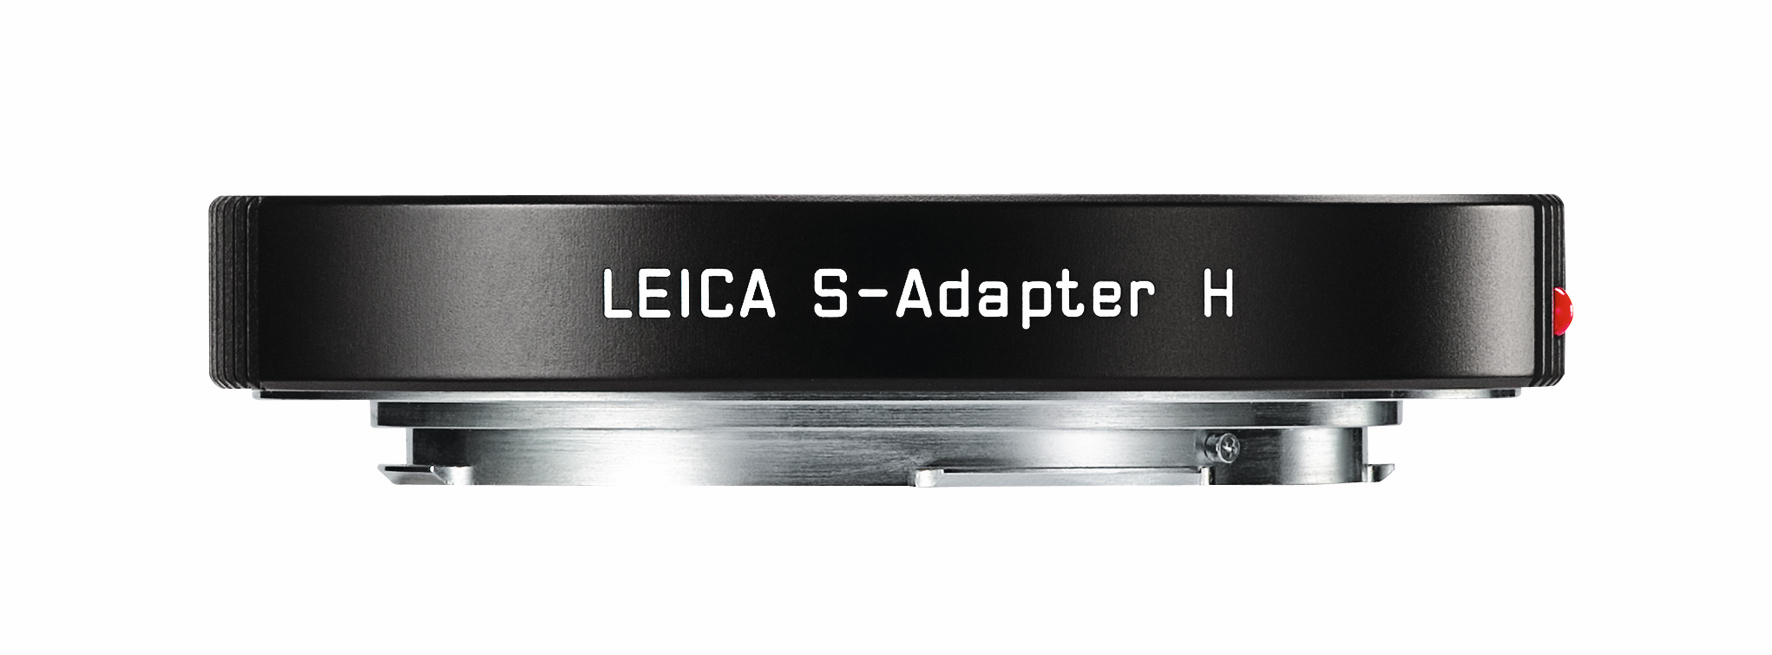 S-Adapter H